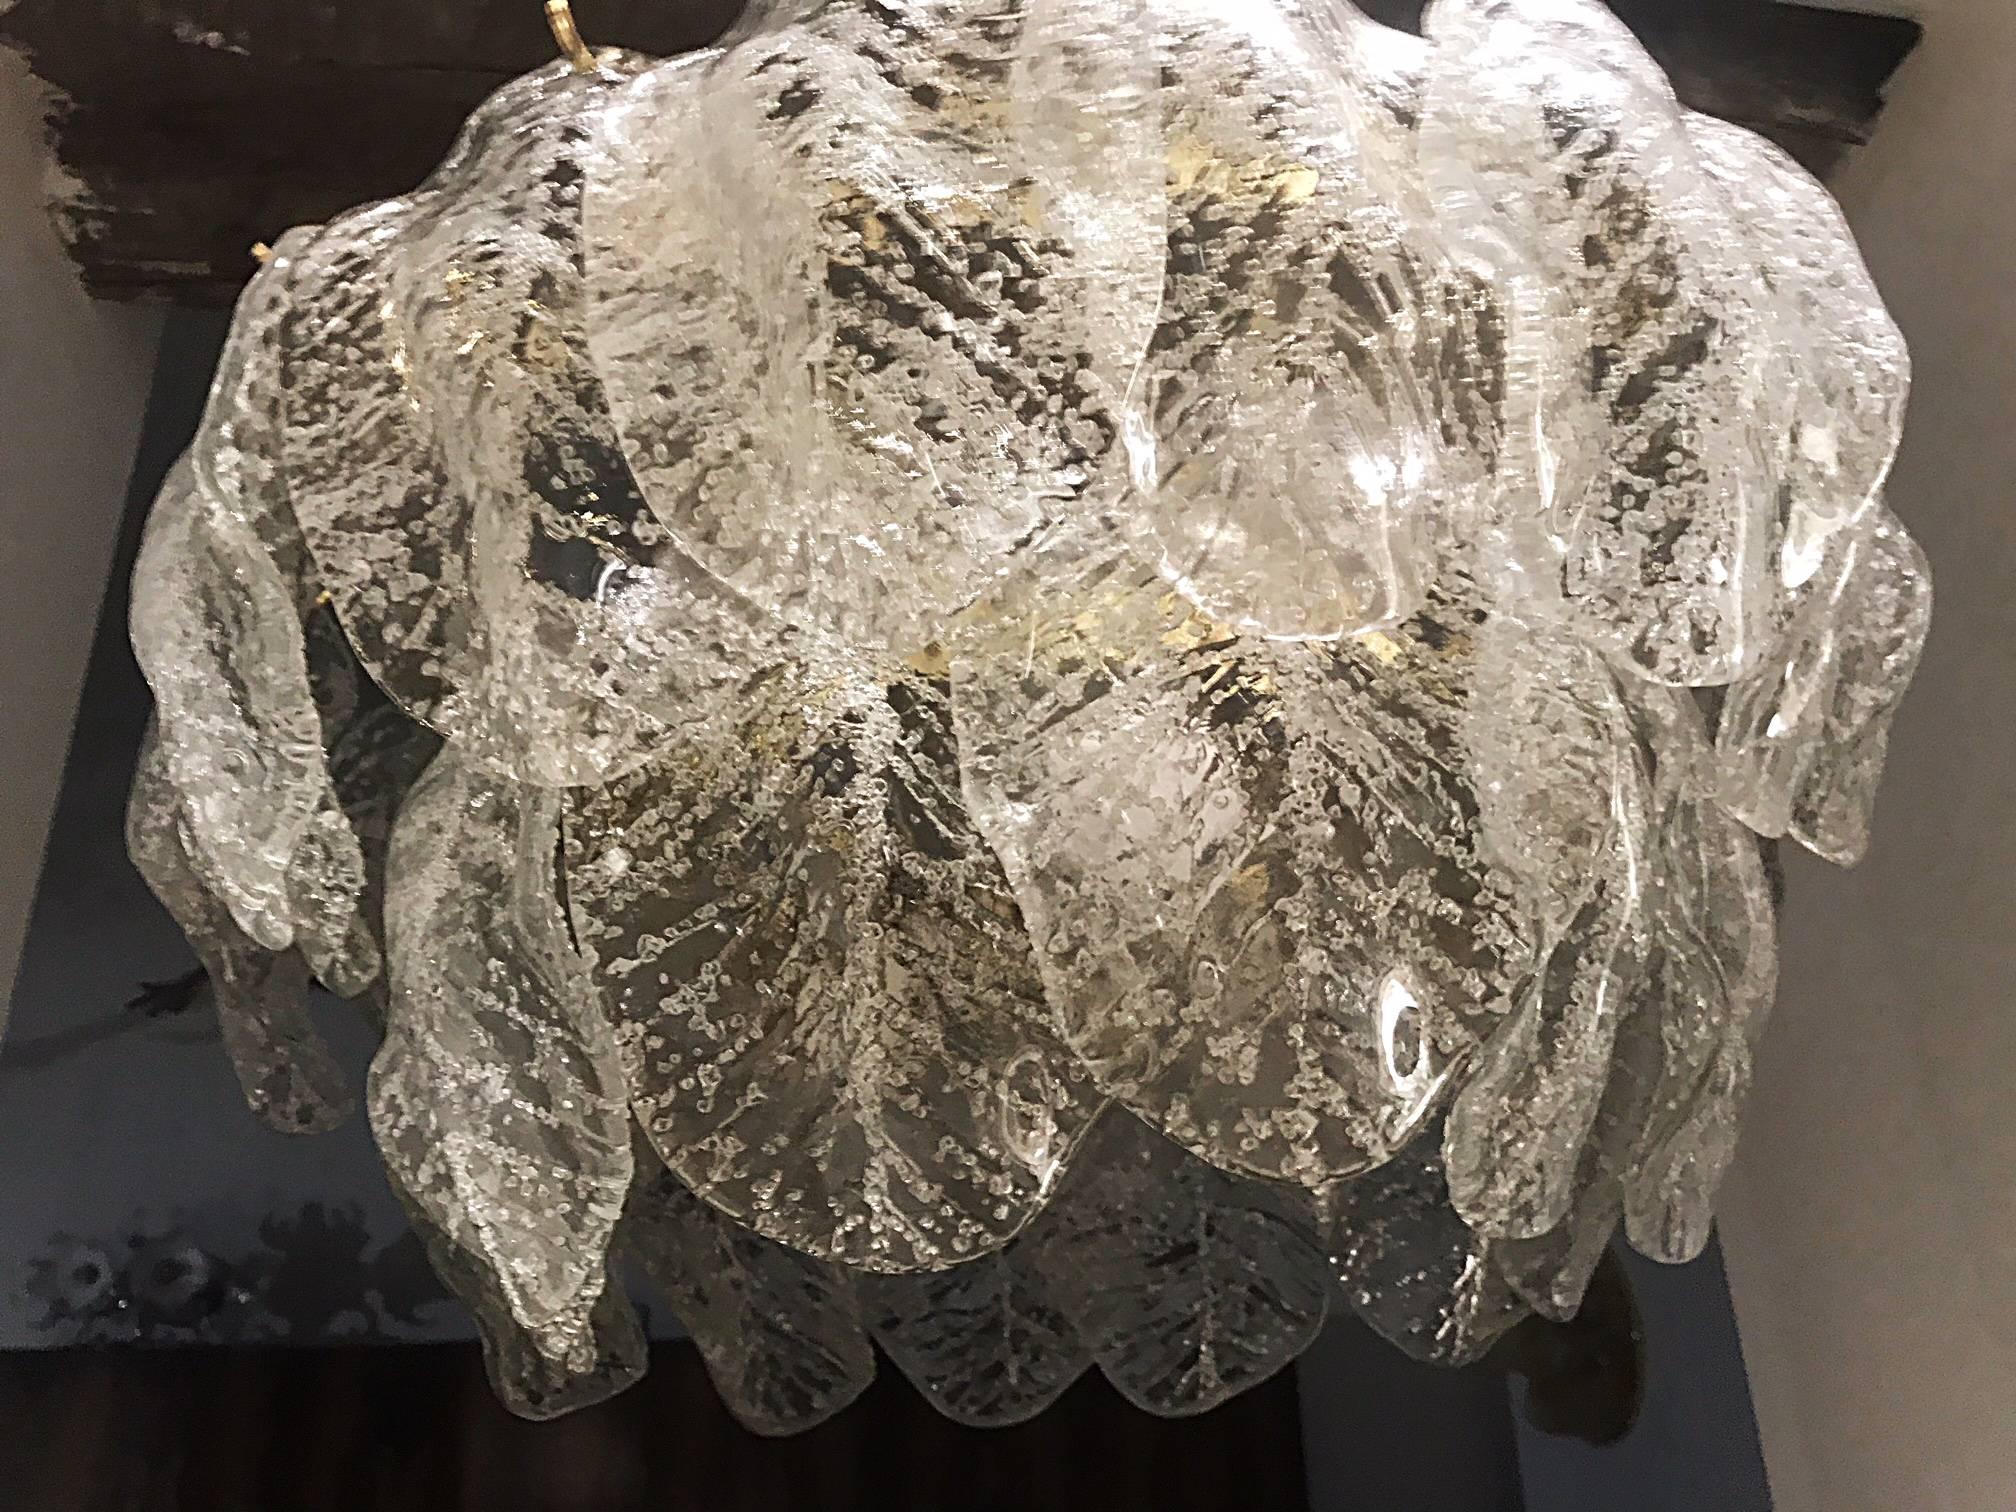 This large vintage glass leaf chandelier was manufactured by Mazzega in Italy during the 1960s. It features clear frost glass leaves. Complete and in a good working vintage condition.
A real stunning ORIGINAL vintage period lamp !! Model made in